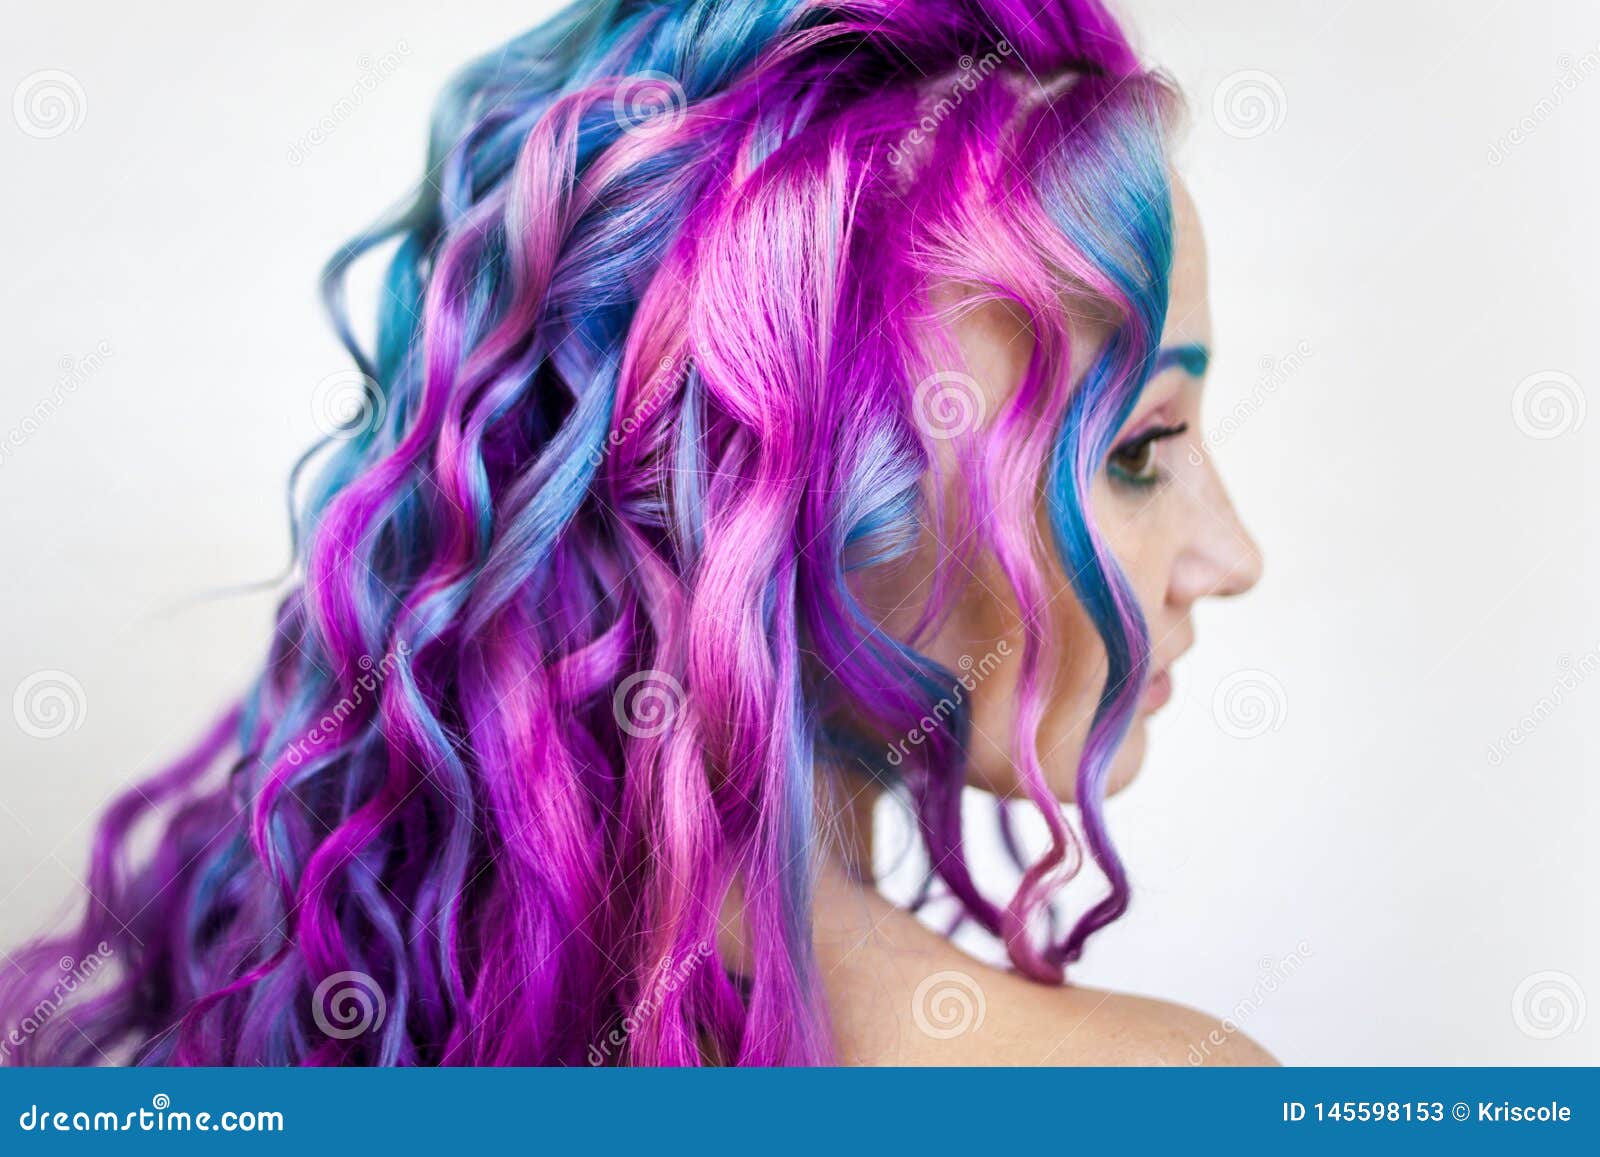 1. "20 Pink and Blue Hair Ideas for Bold and Vibrant Looks" - wide 10